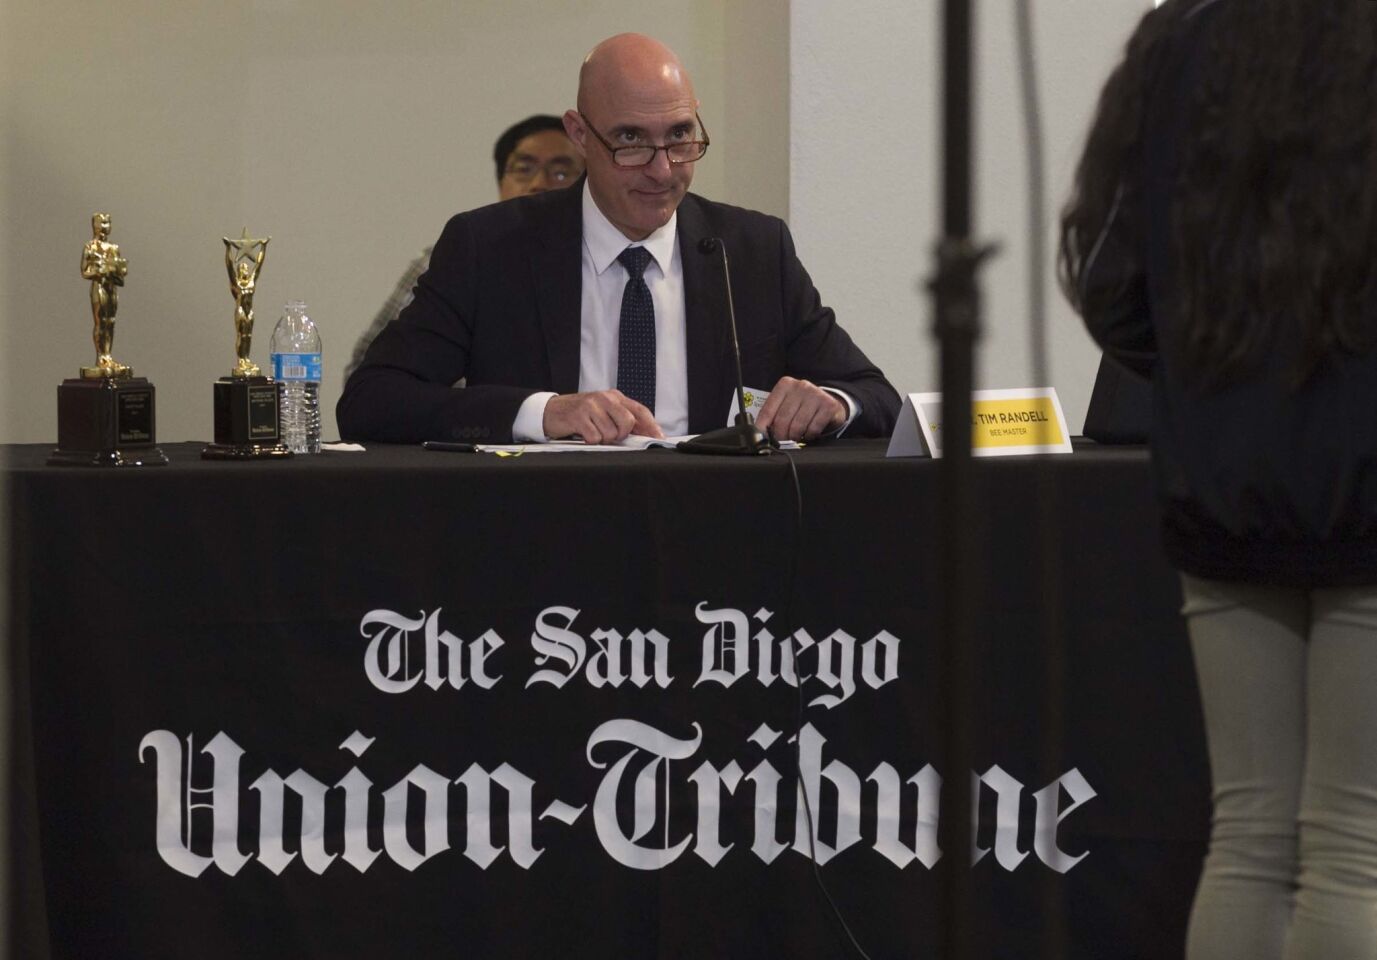 Dr. Tim Randell was the Spelling Bee Master at the 49th annual San Diego Union-Tribune county wide spelling bee held at Liberty Station.